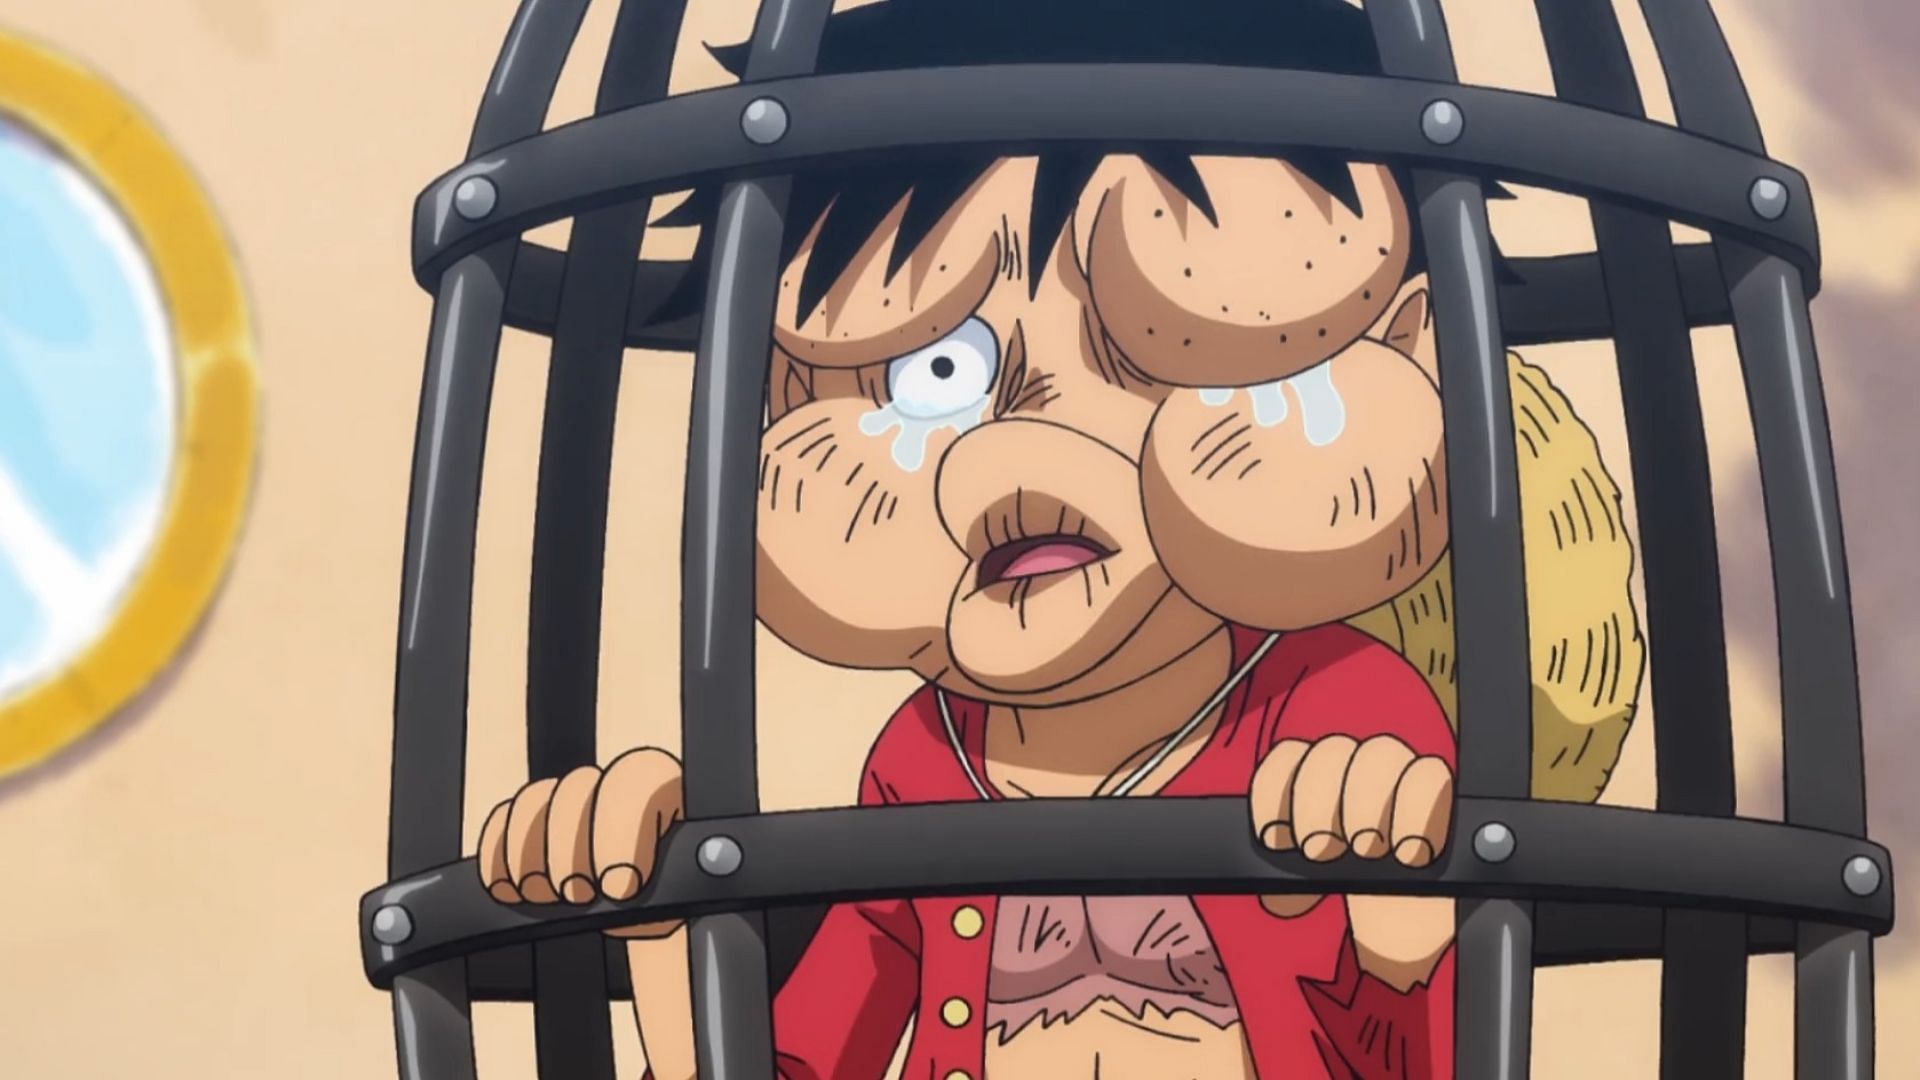 One Piece - Wanted Poster - Luffy (500 Million Berries)